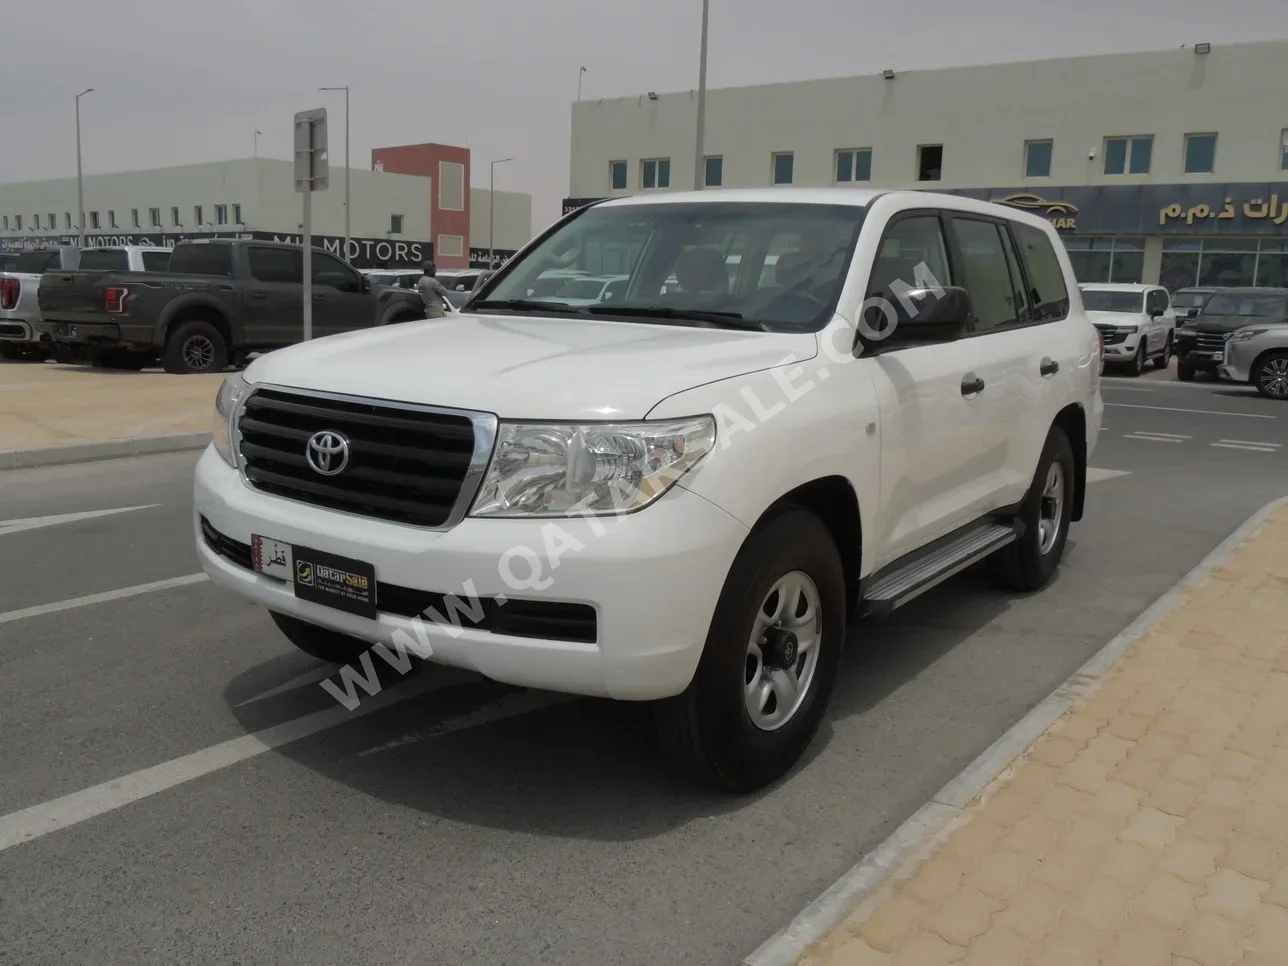 Toyota  Land Cruiser  G  2011  Automatic  390,000 Km  6 Cylinder  Four Wheel Drive (4WD)  SUV  White